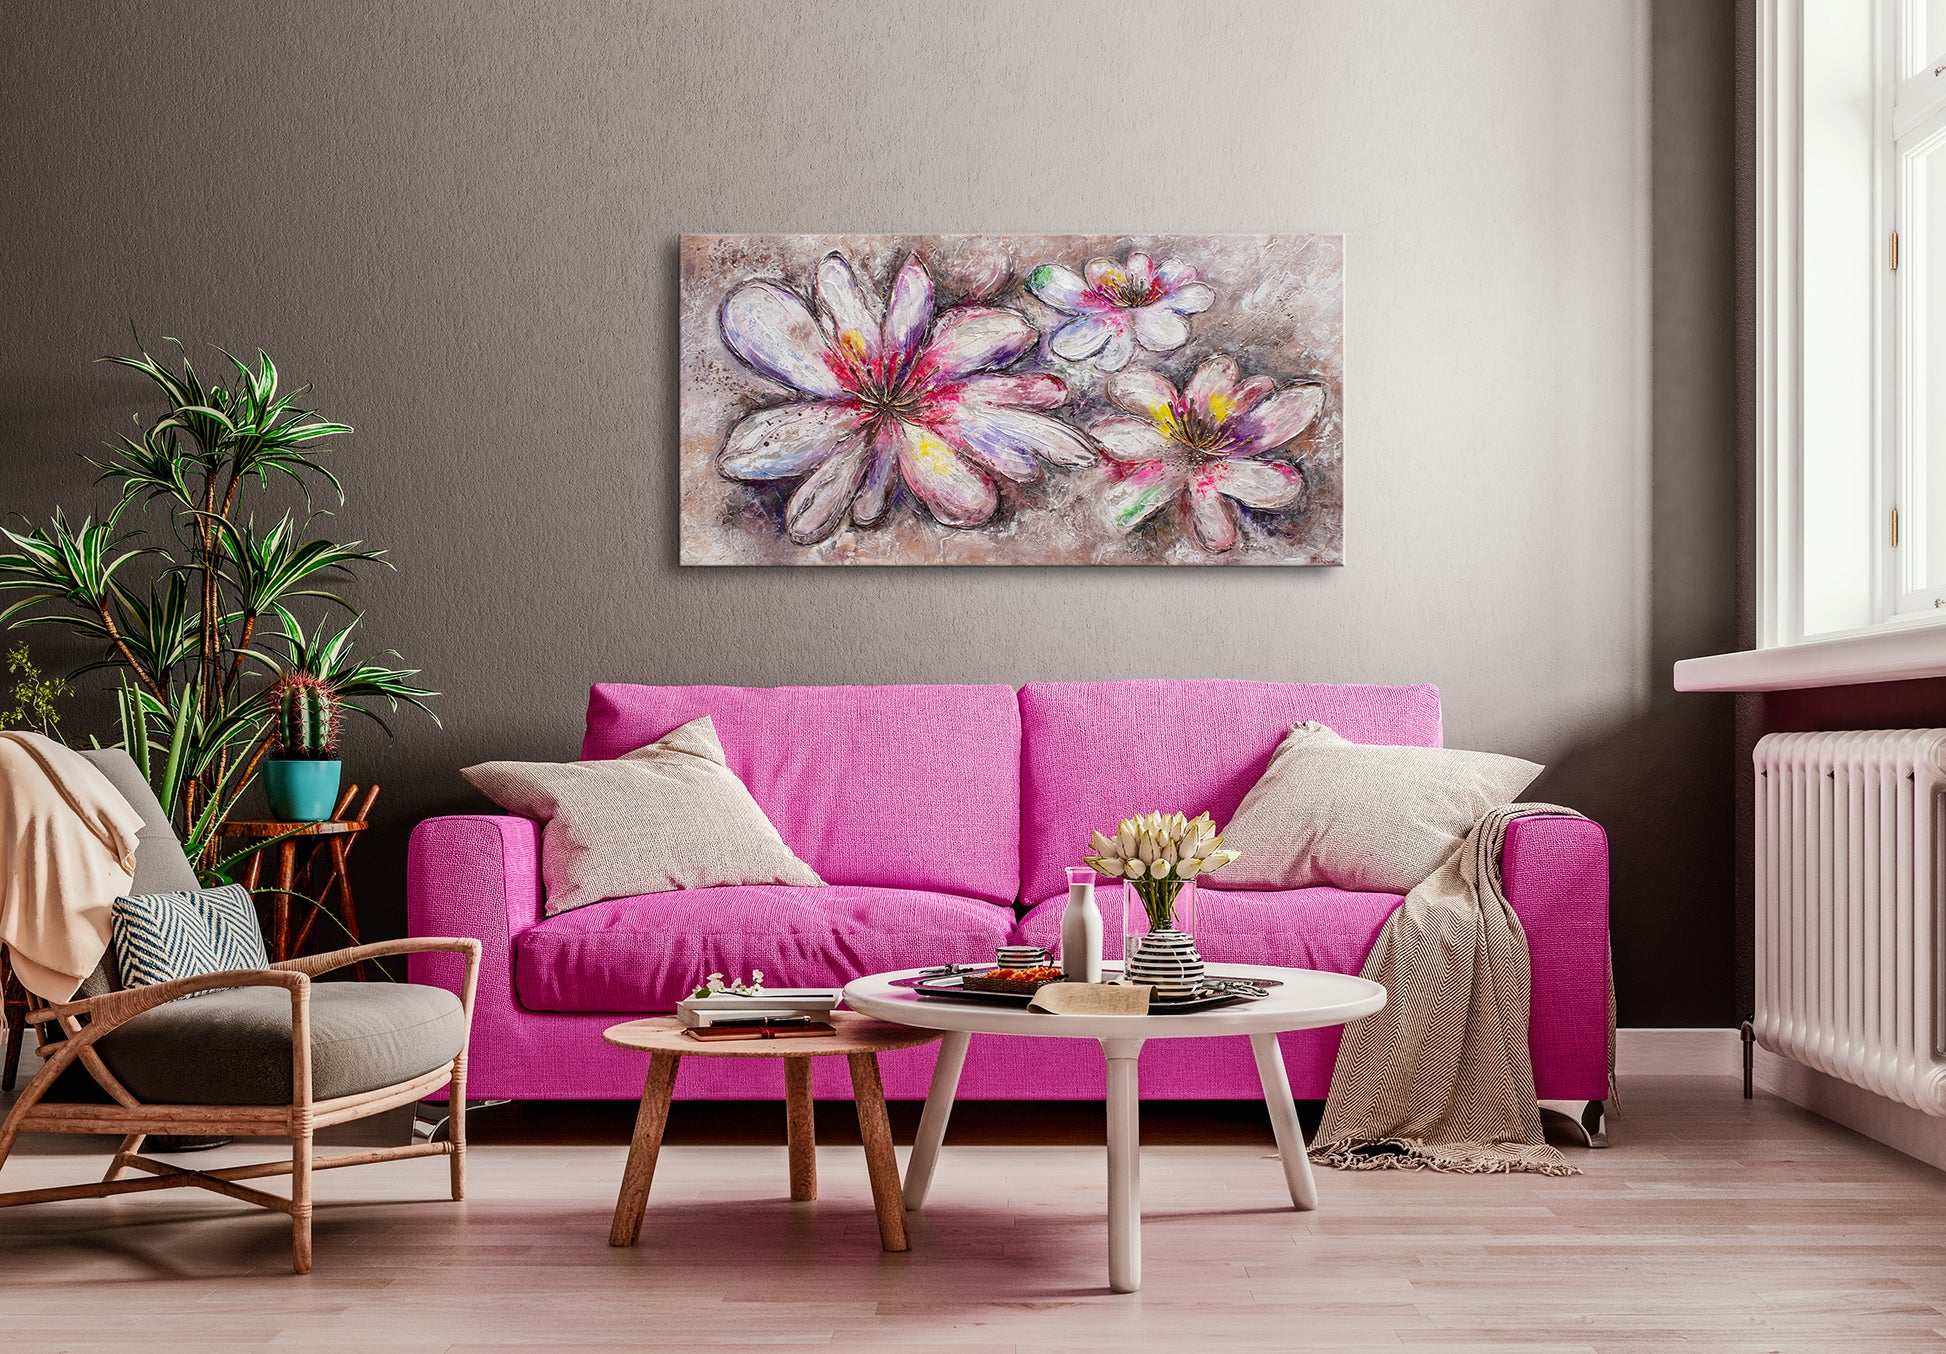 Flower canvas painting for living room